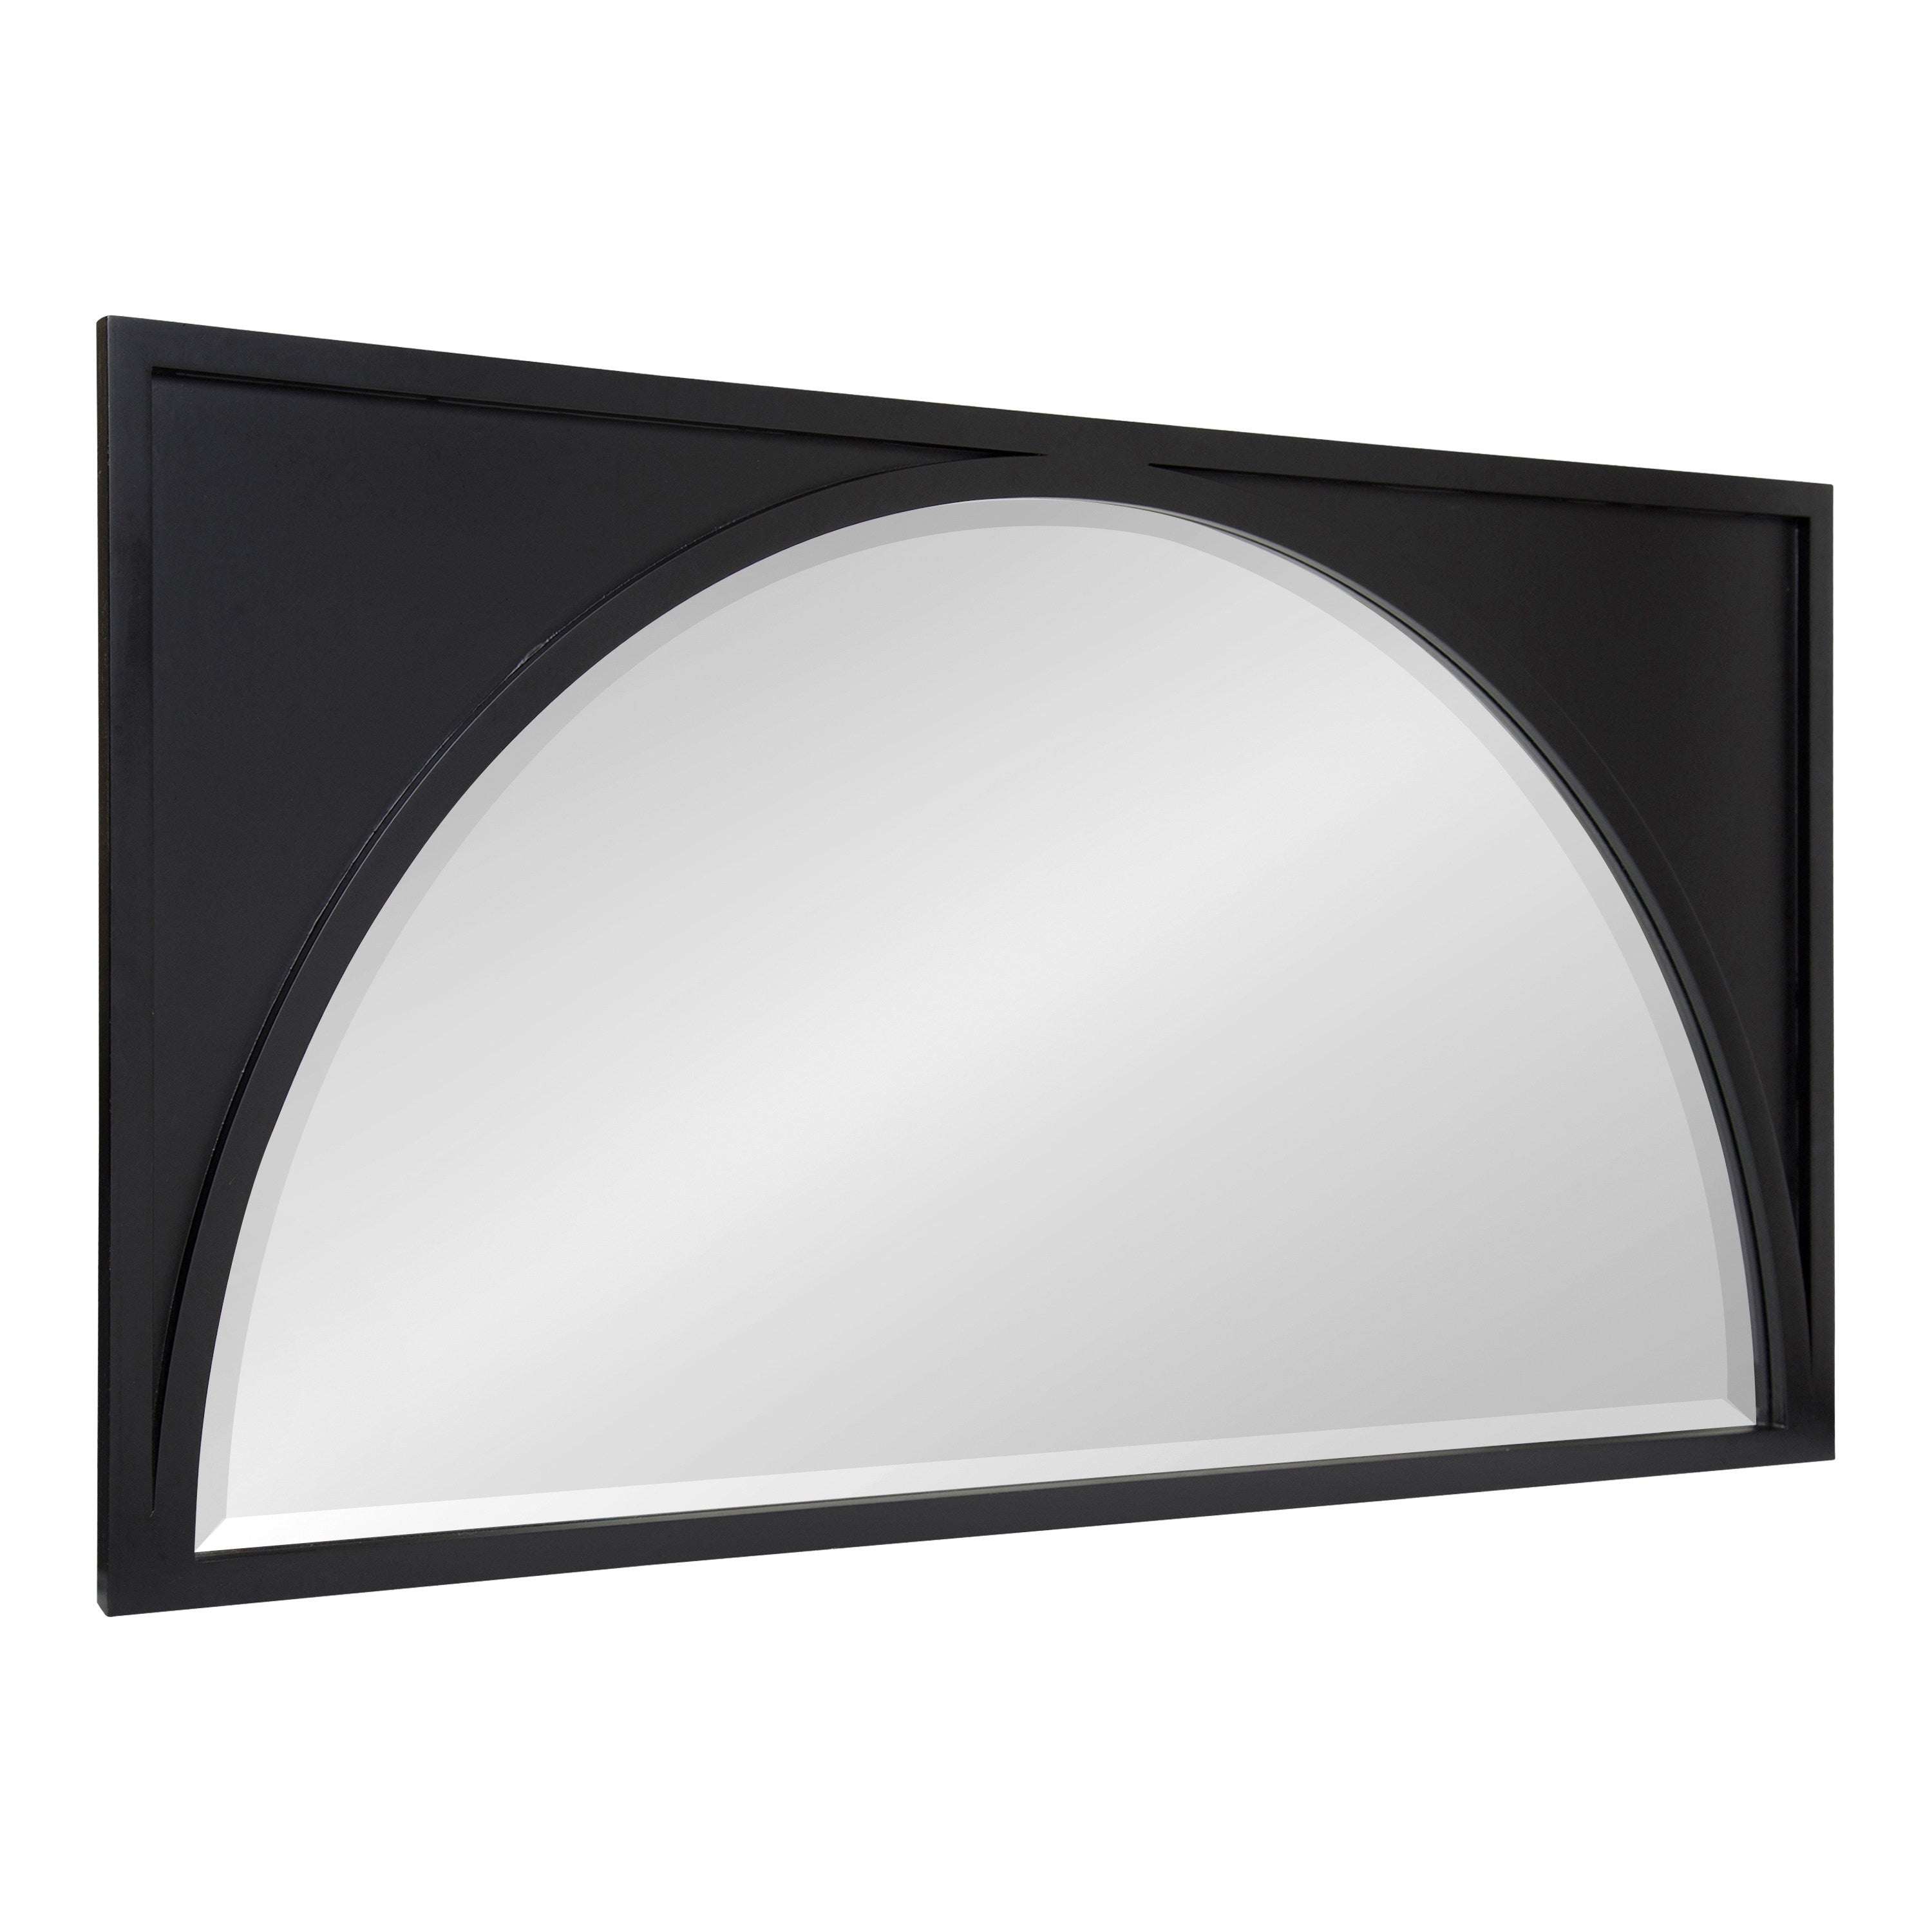 Andover Wooden Wall Panel Arch Mirror